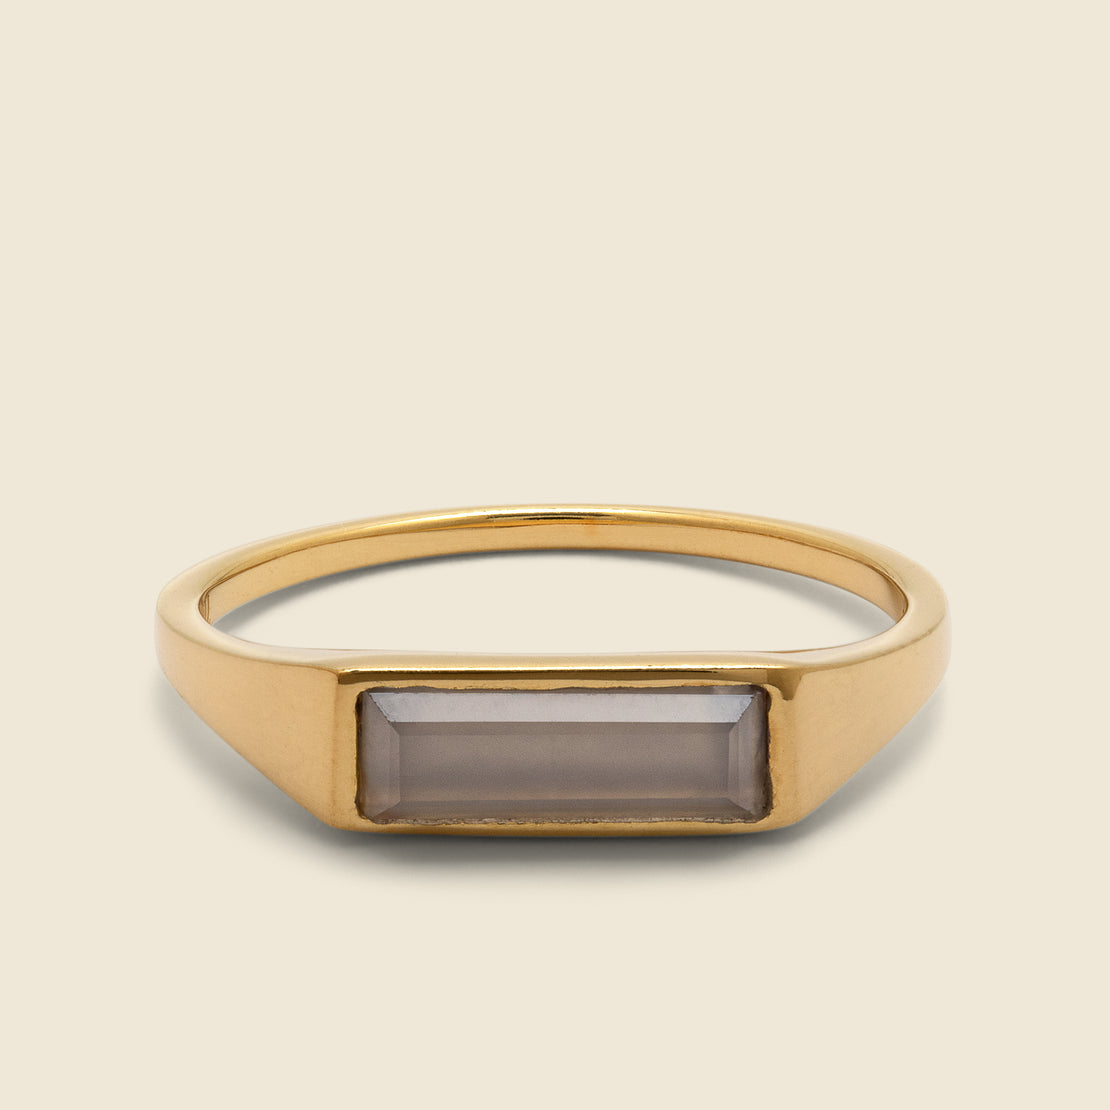 Slim Lennox Ring - Gold Vermeil/Chalcedony - Miansai - STAG Provisions - Accessories - Rings